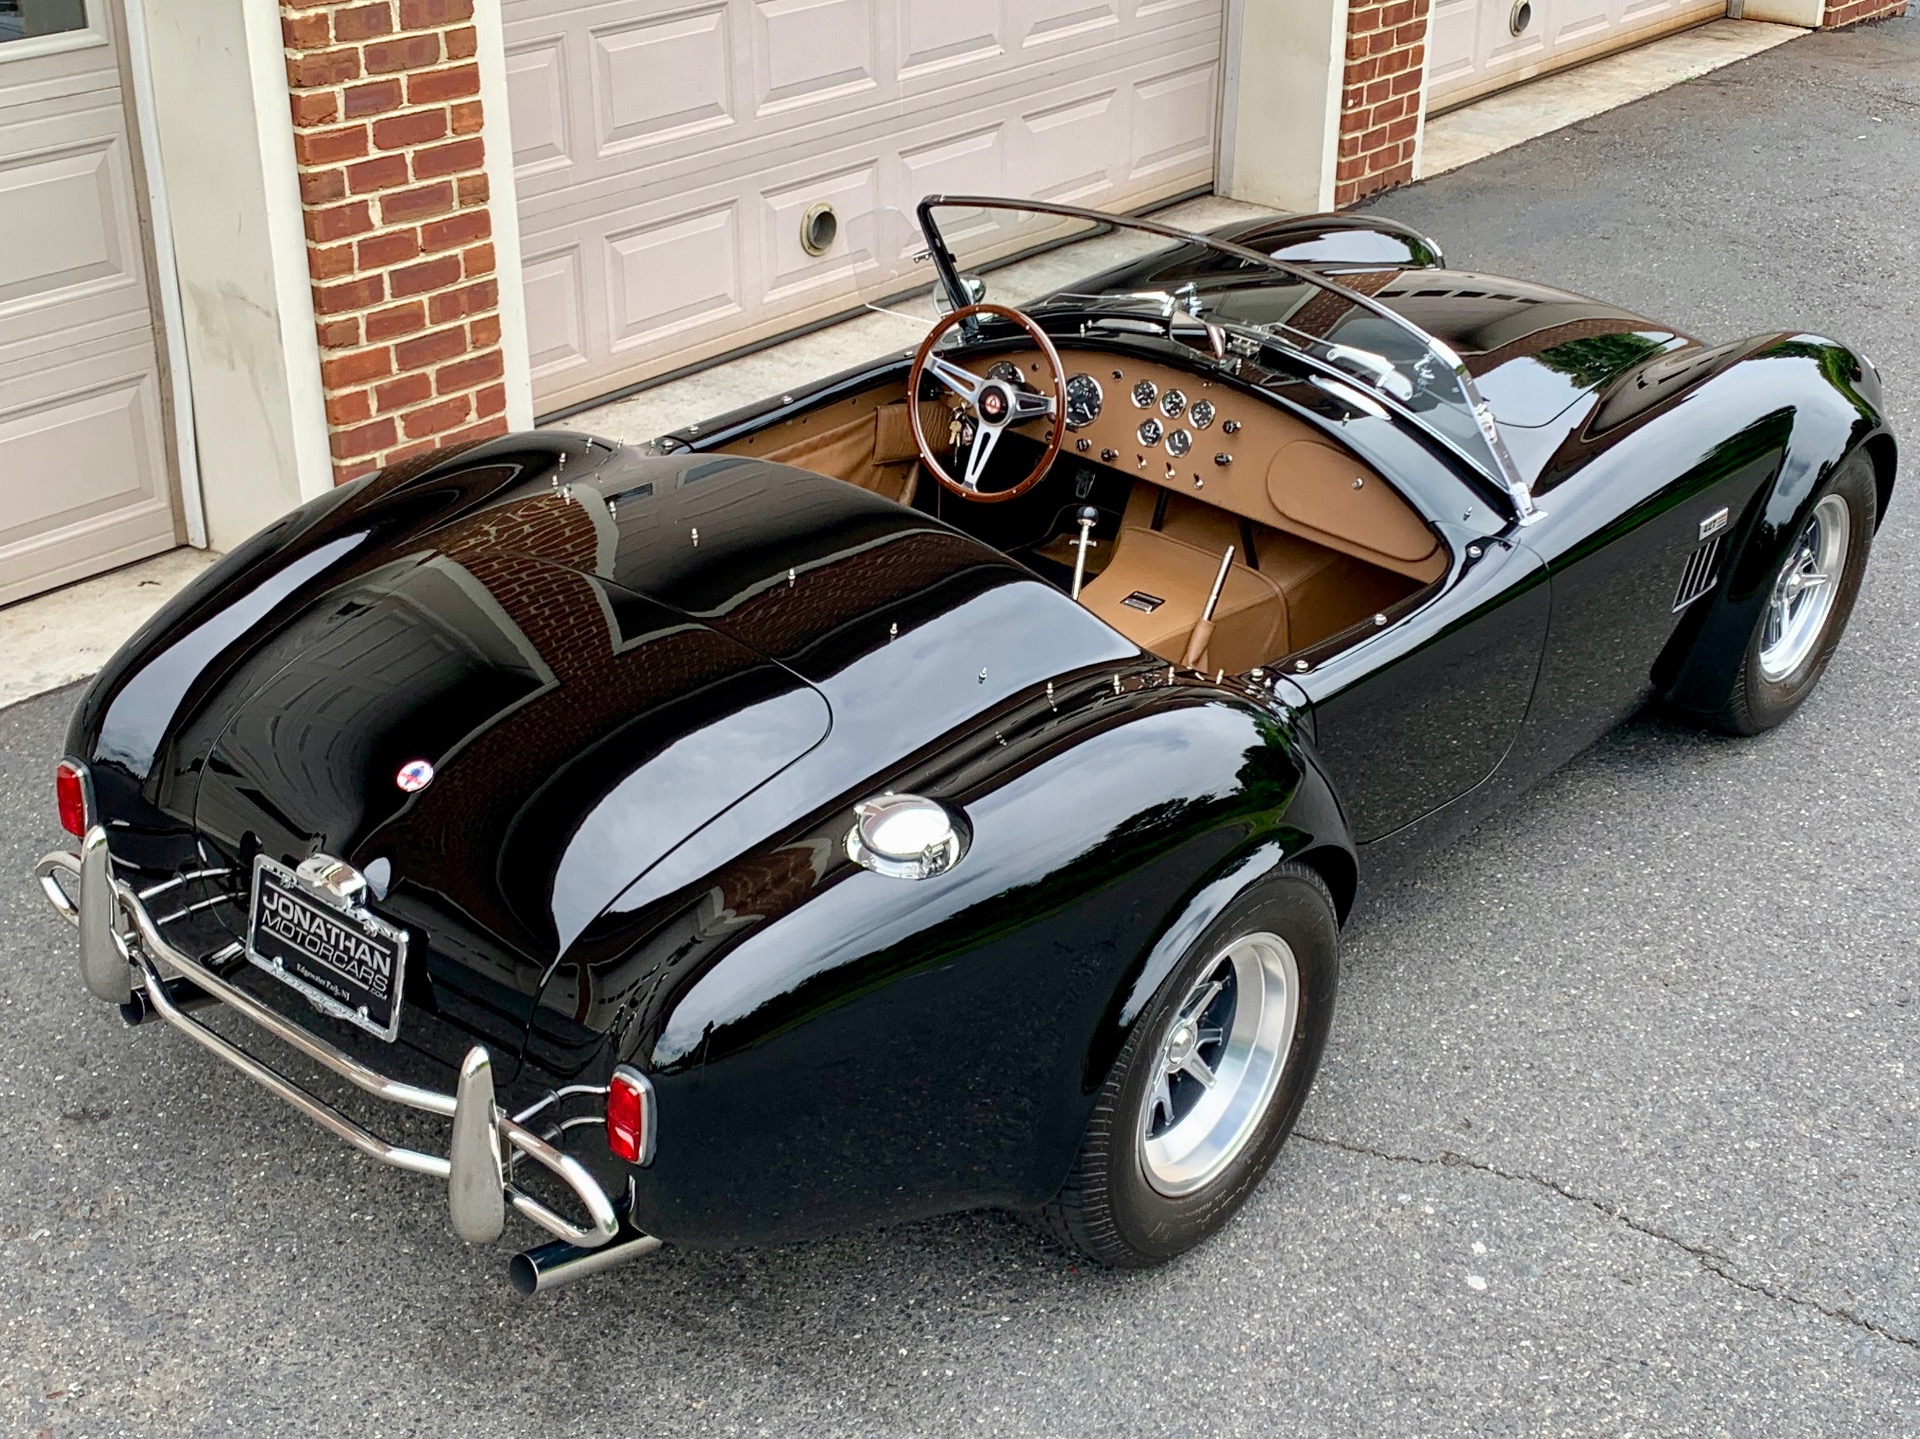 New-1965-Superformance-Roadster-MKIII-AVAILABLE-NOW